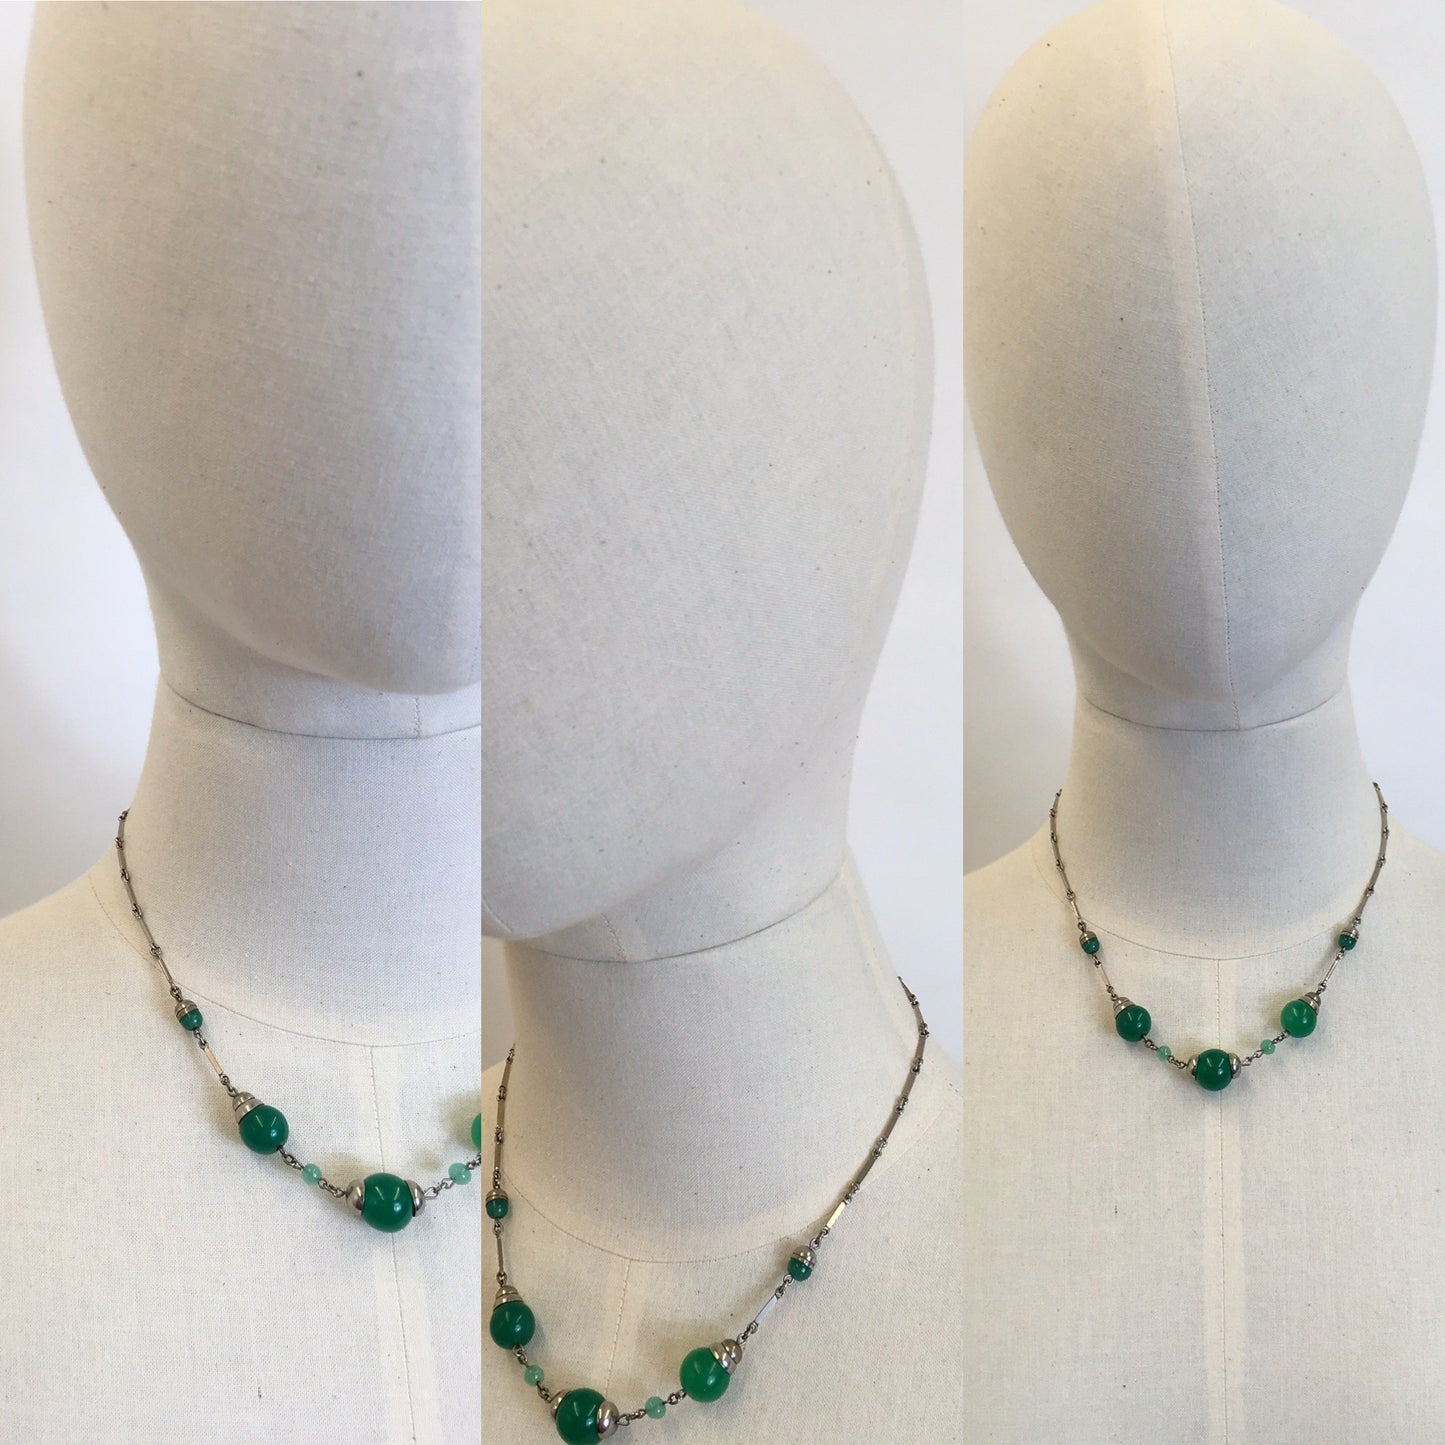 Original 1930’s Necklace - With Bottle  Green Glass Beads